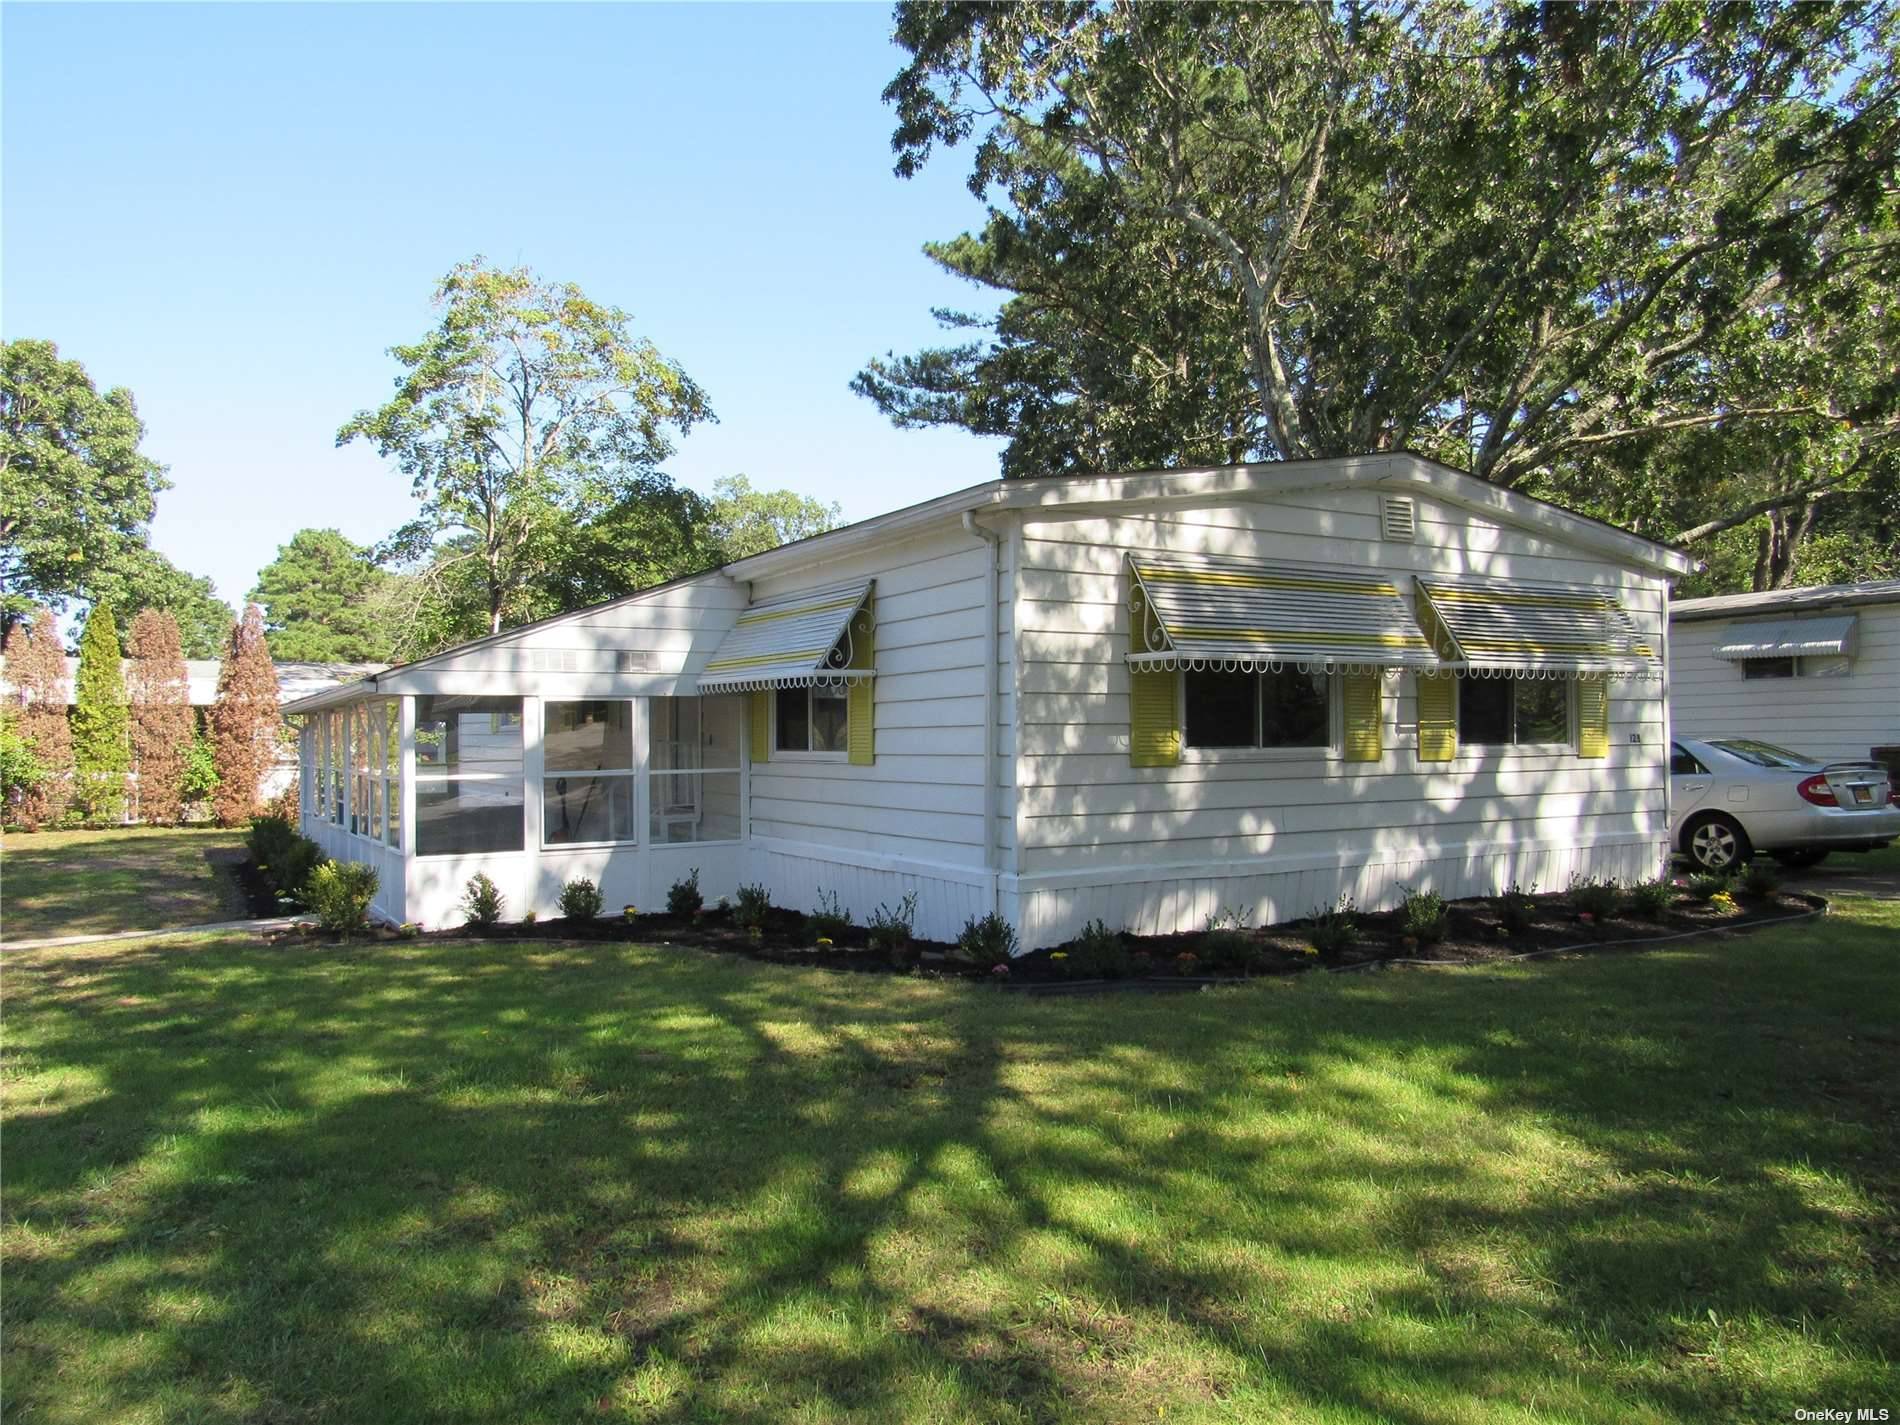 Large 1440 sq ft double wide located in a 55 and over adult community.